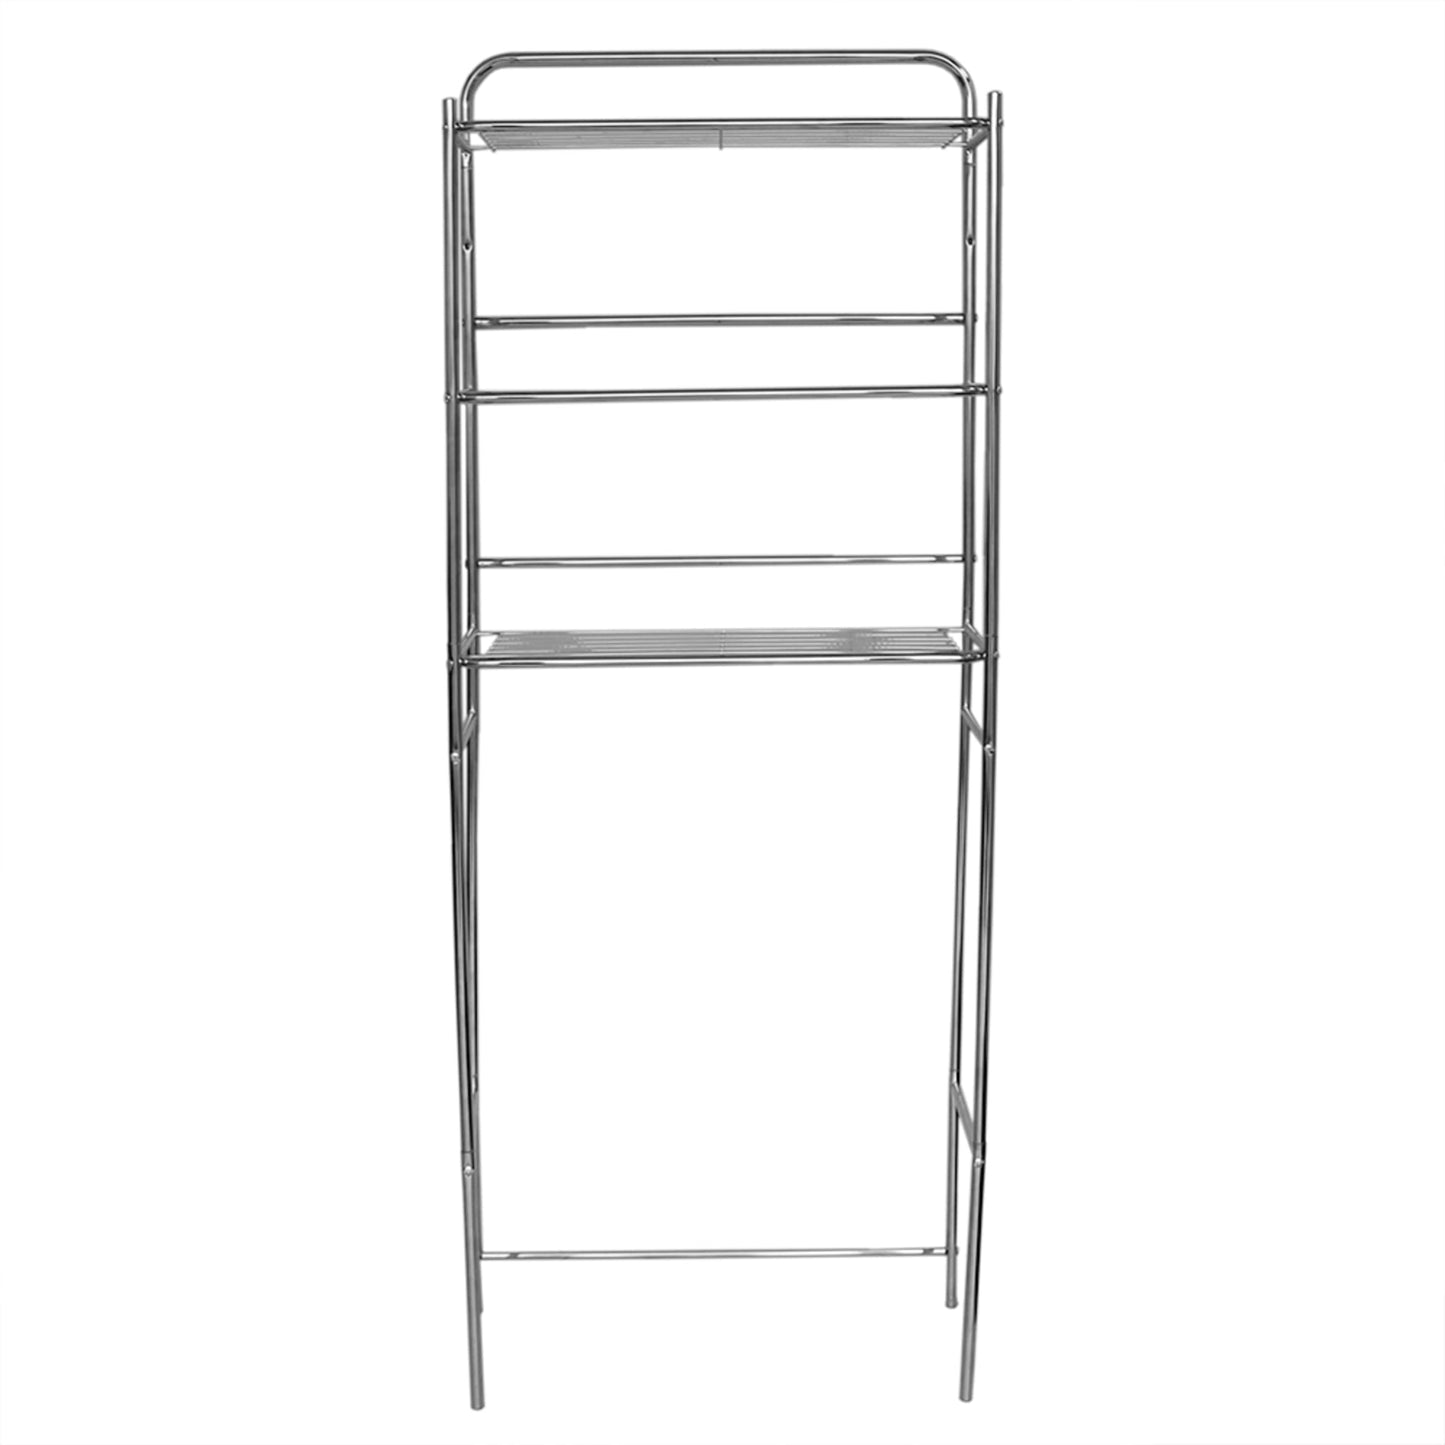 Home Basics 3 Tier Steel Space Saver Over The Toilet Bathroom Shelf with Open Shelving, Chrome